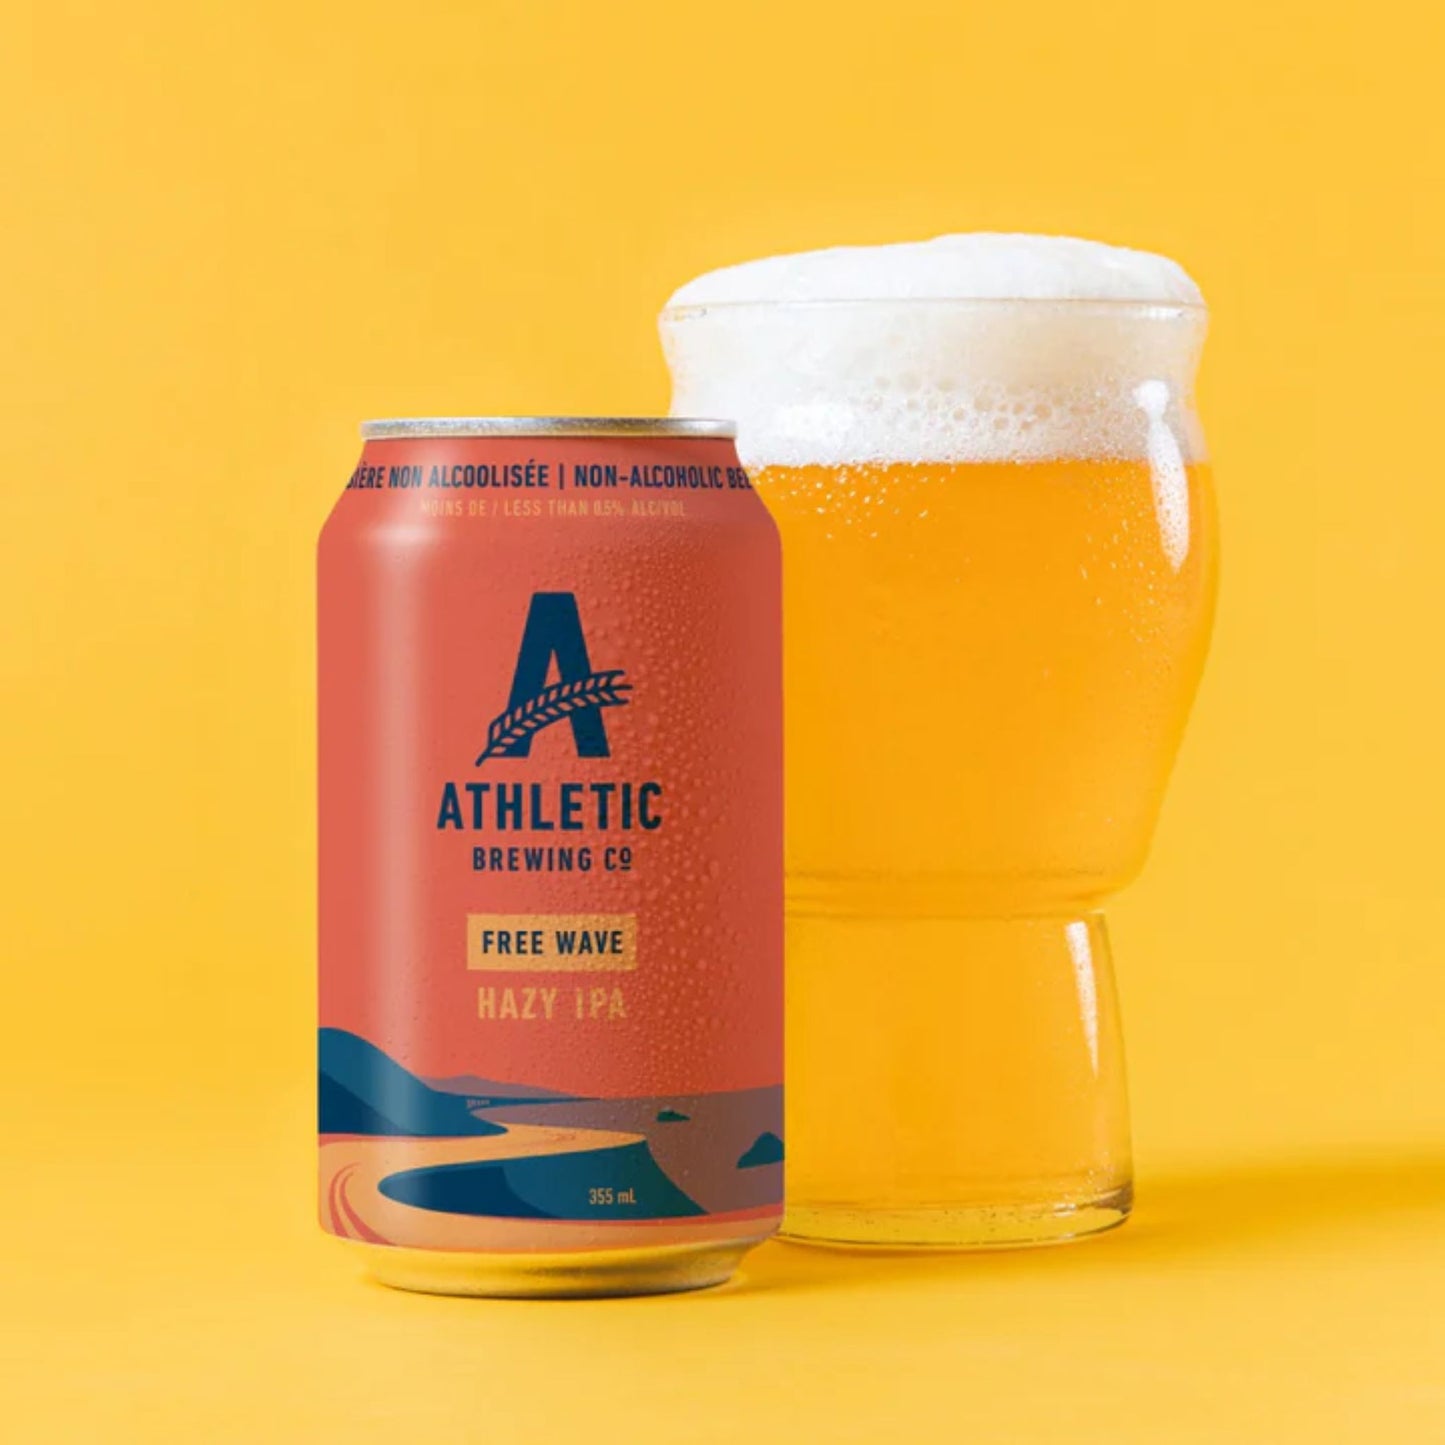 Athletic Brewing Free Wave Hazy IPA non-alcoholic beer is available for sale at Knyota Drinks in Ottawa.